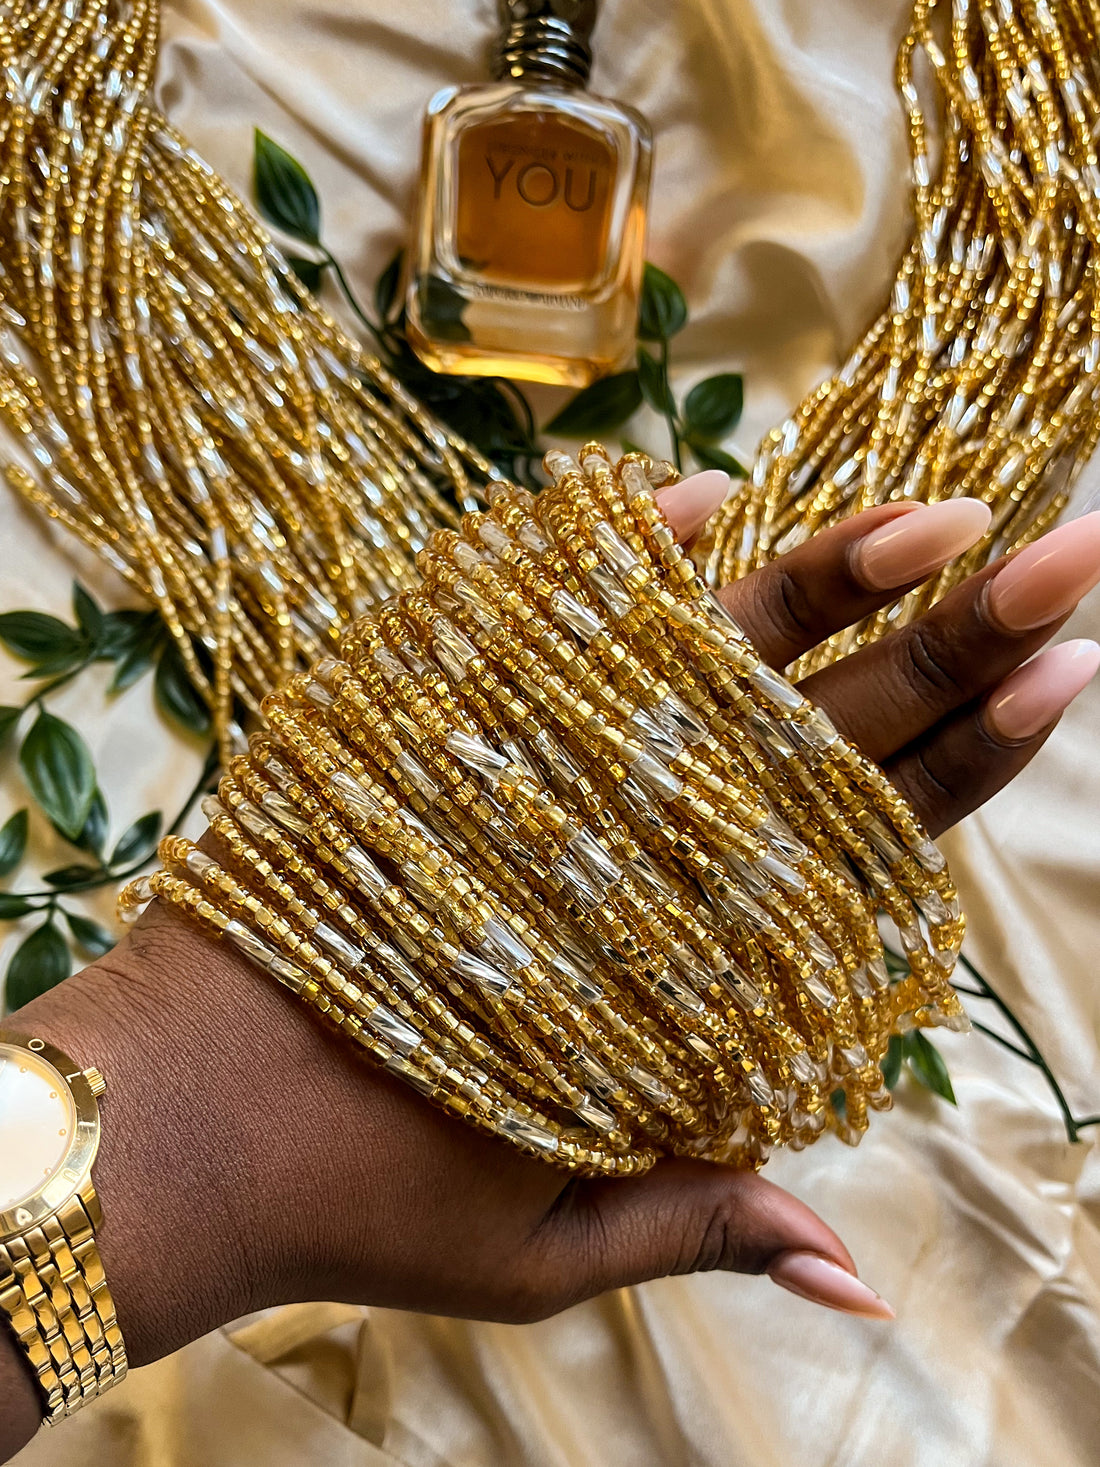 BEST SELLER  Gold Treasure African Waist beads - Get 5 for 50% Off at checkout 🔥